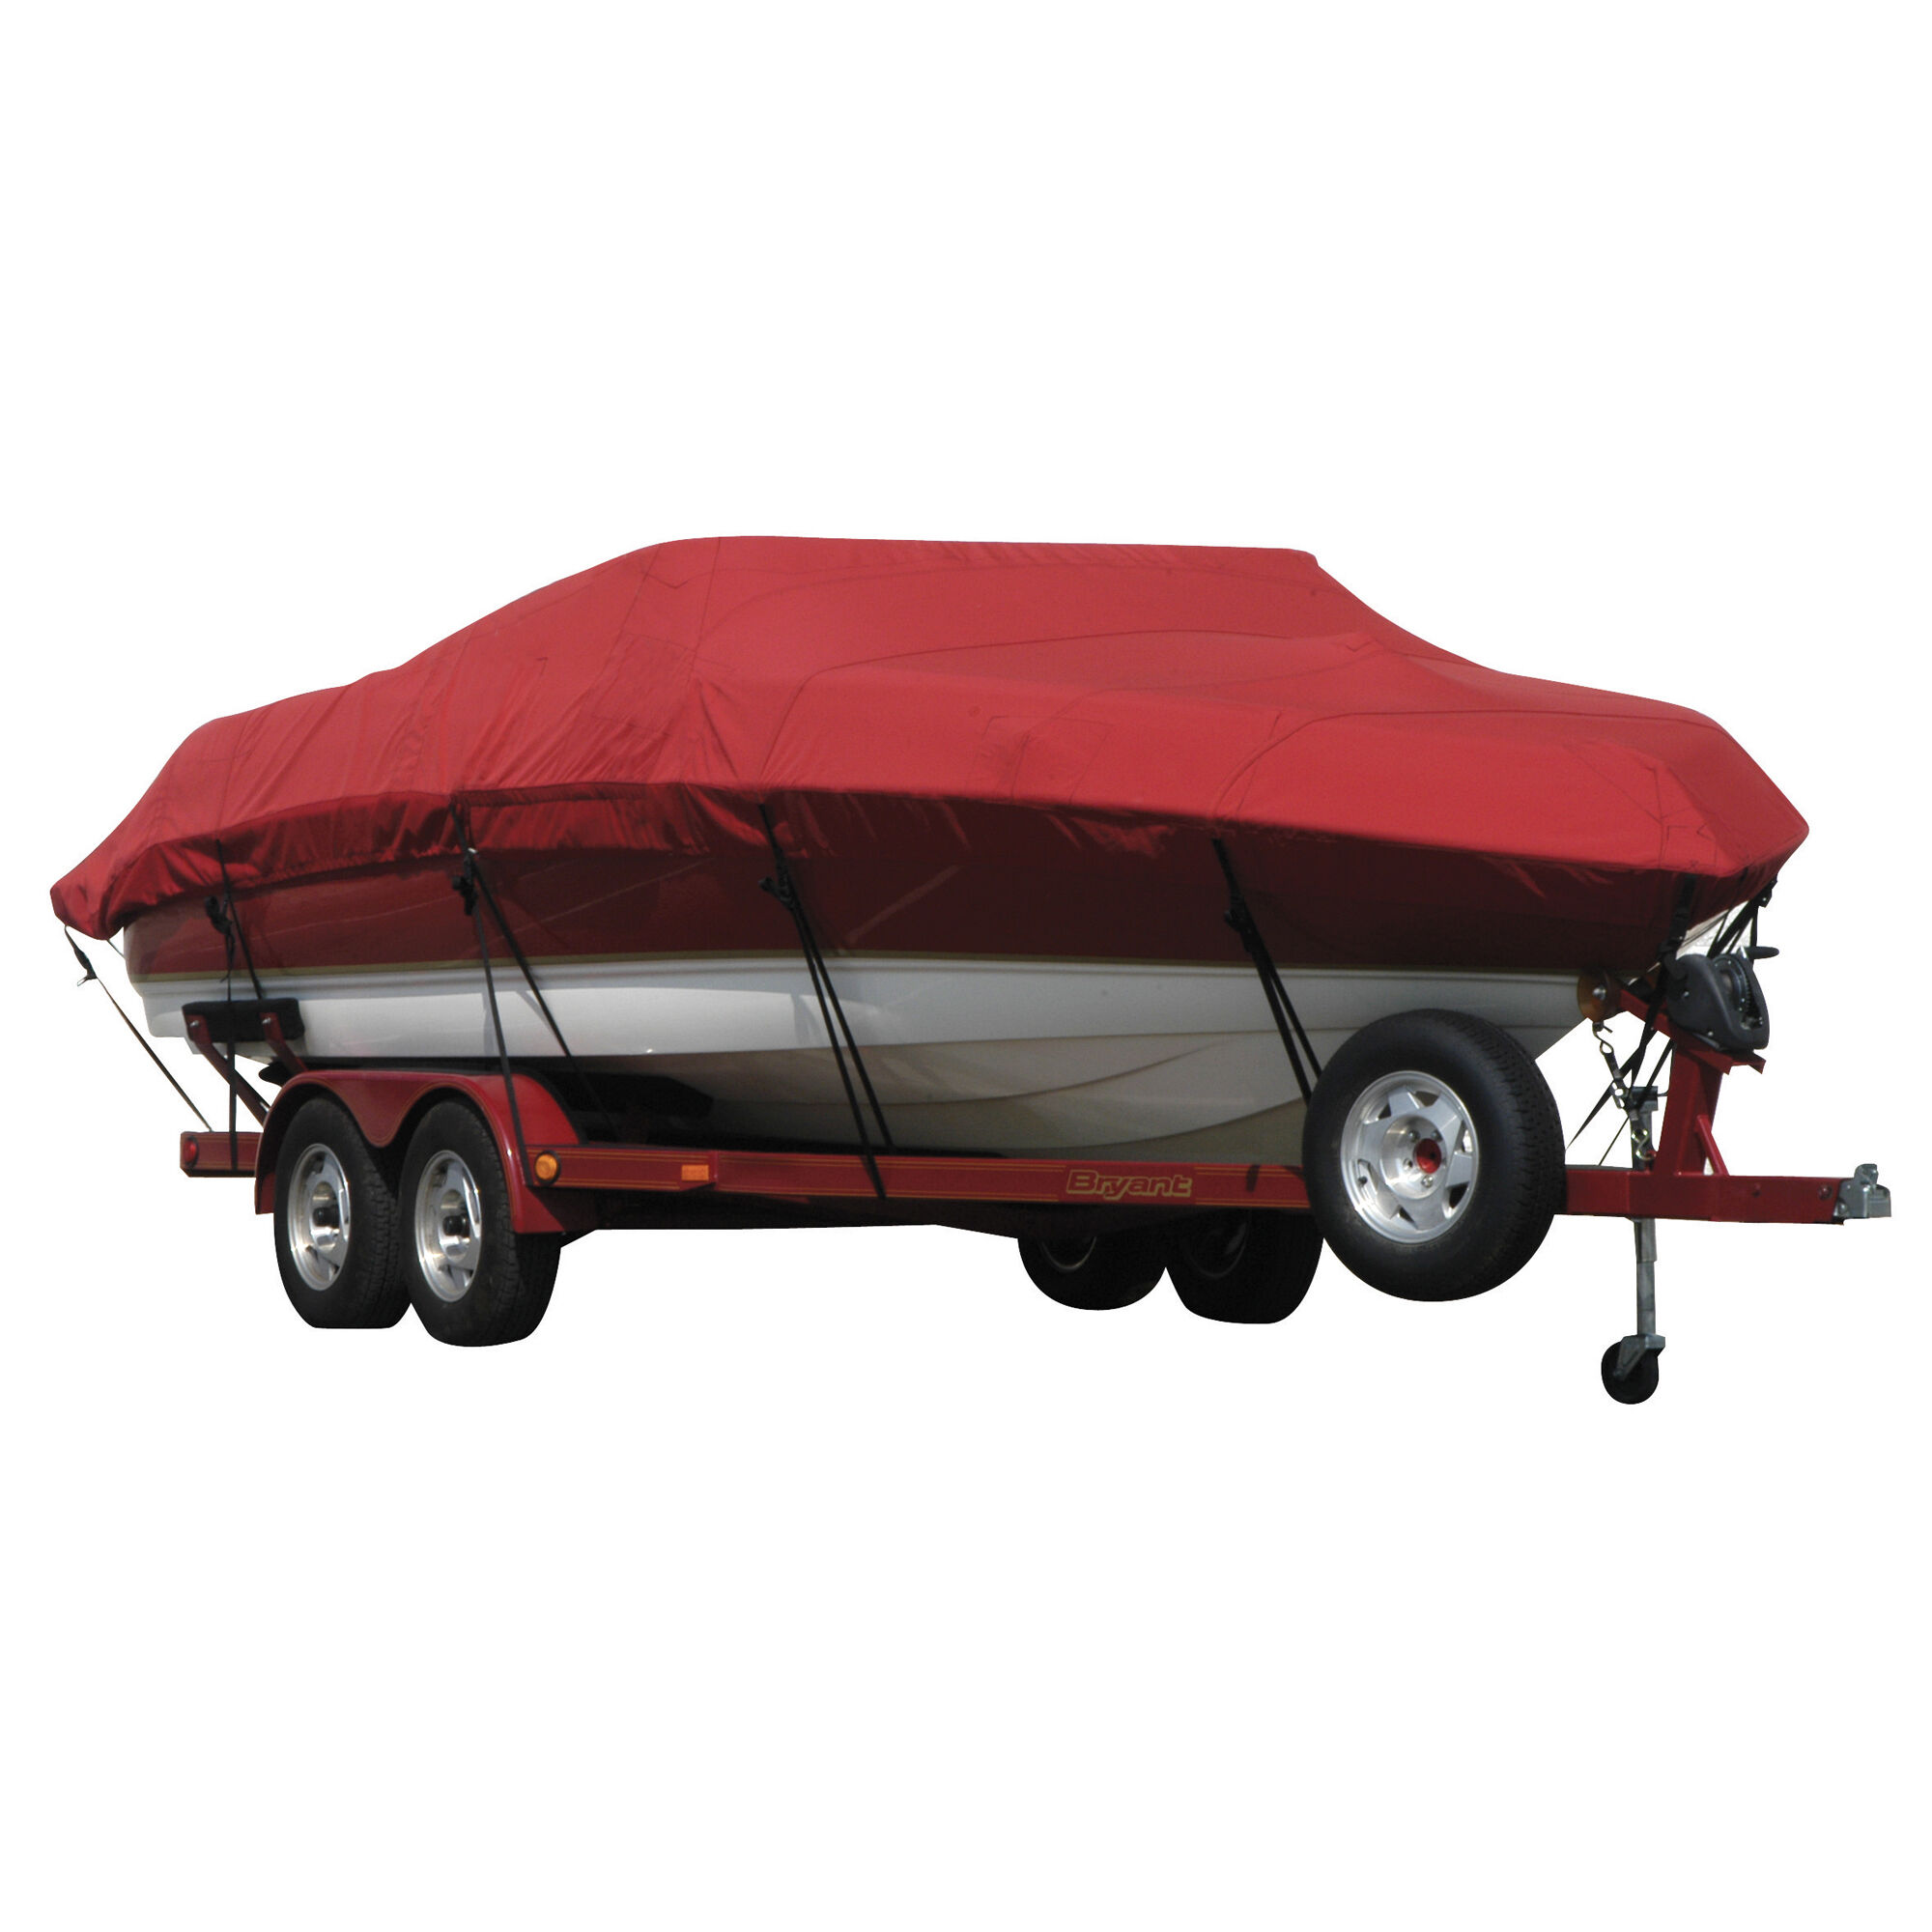 Covermate Exact Fit Sunbrella Boat Cover for Campion Chase 910 Zri Chase 910 Zri Cc I/O. Red